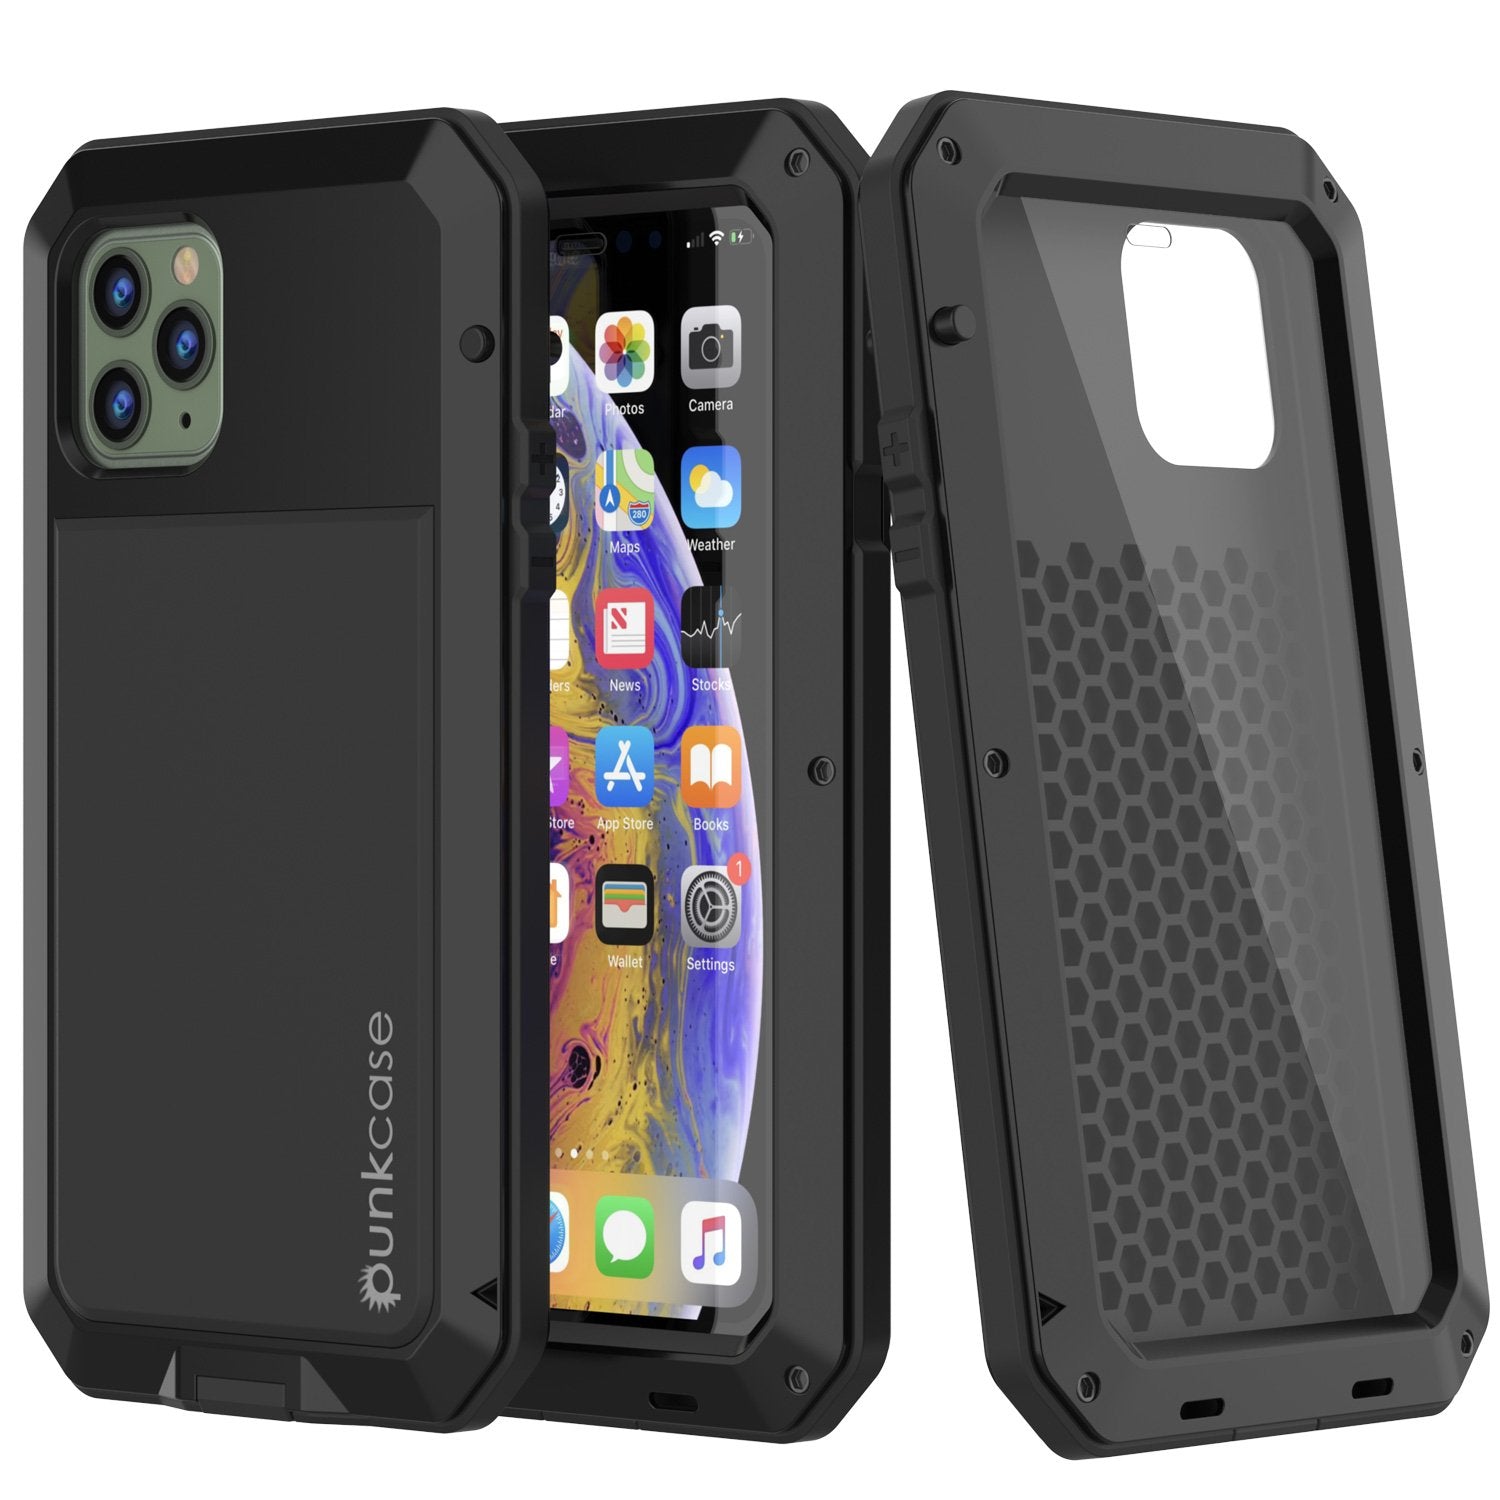 iPhone 11 Pro Max Metal Case, Heavy Duty Military Grade Armor Cover [shock proof] Full Body Hard [Black]